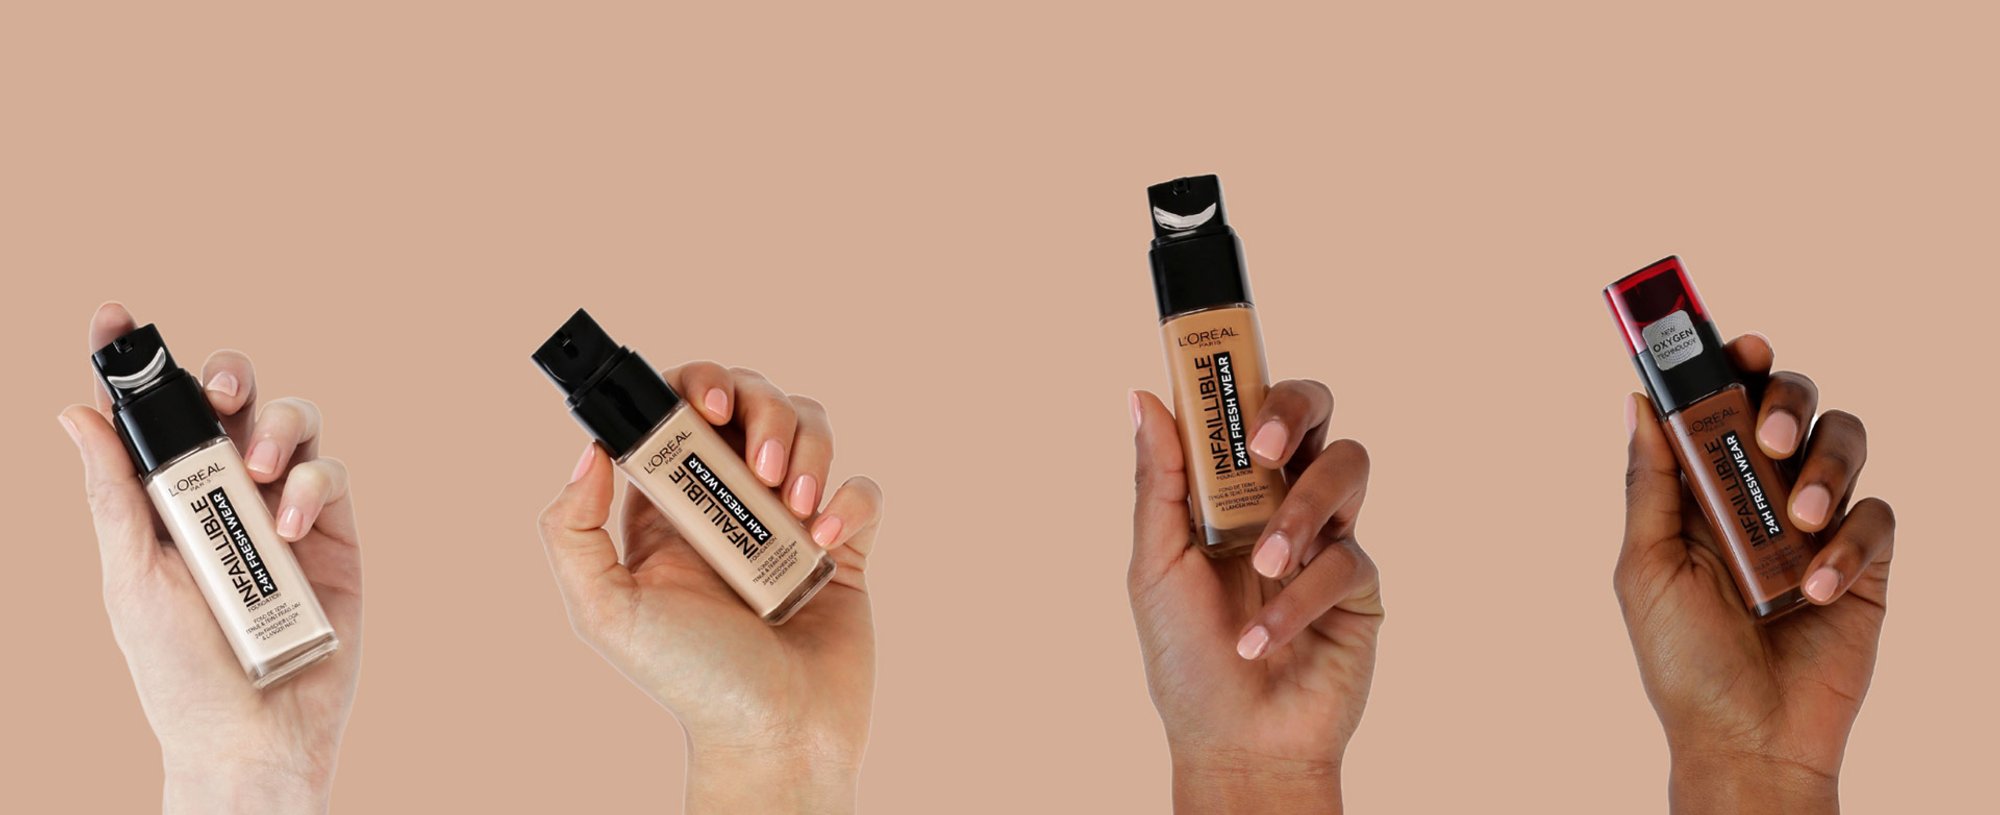 How To Find The Perfect Foundation Match Online - Beauty Bay Edited